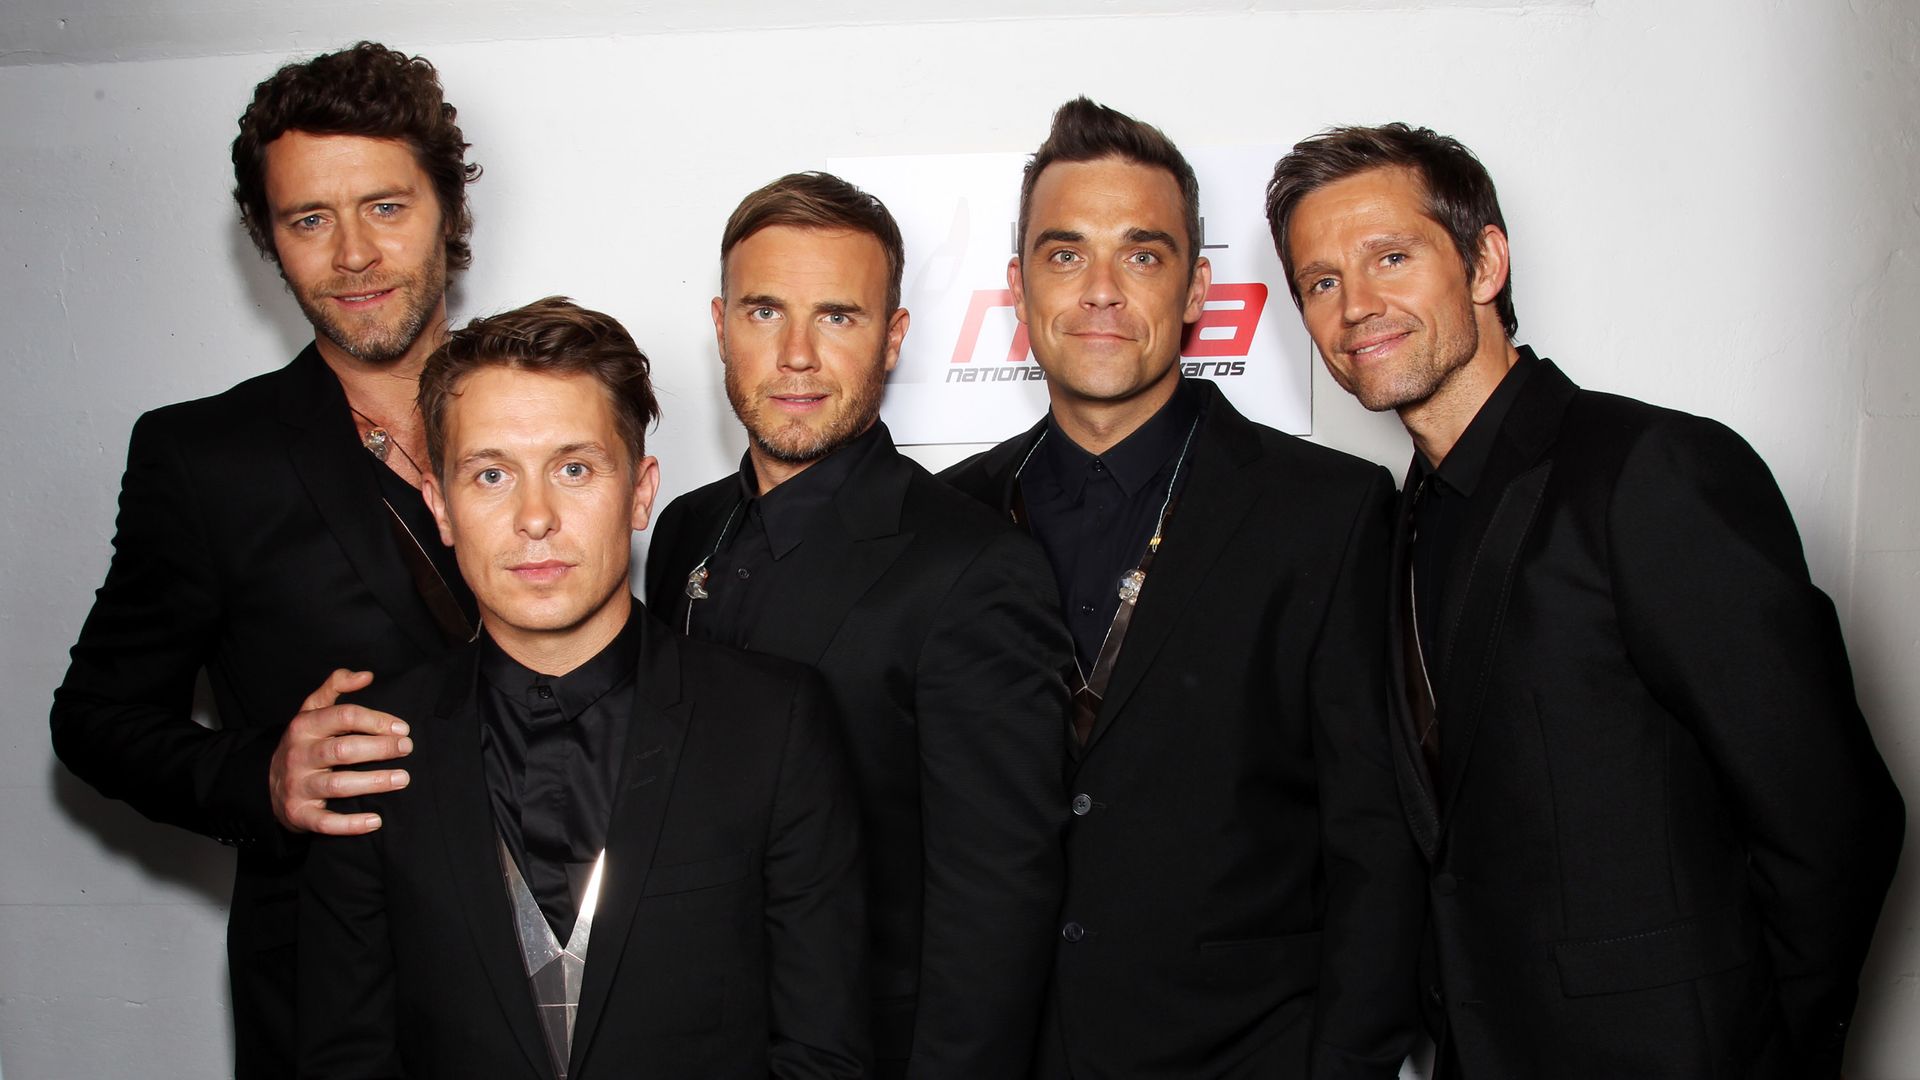 All five members of Take That